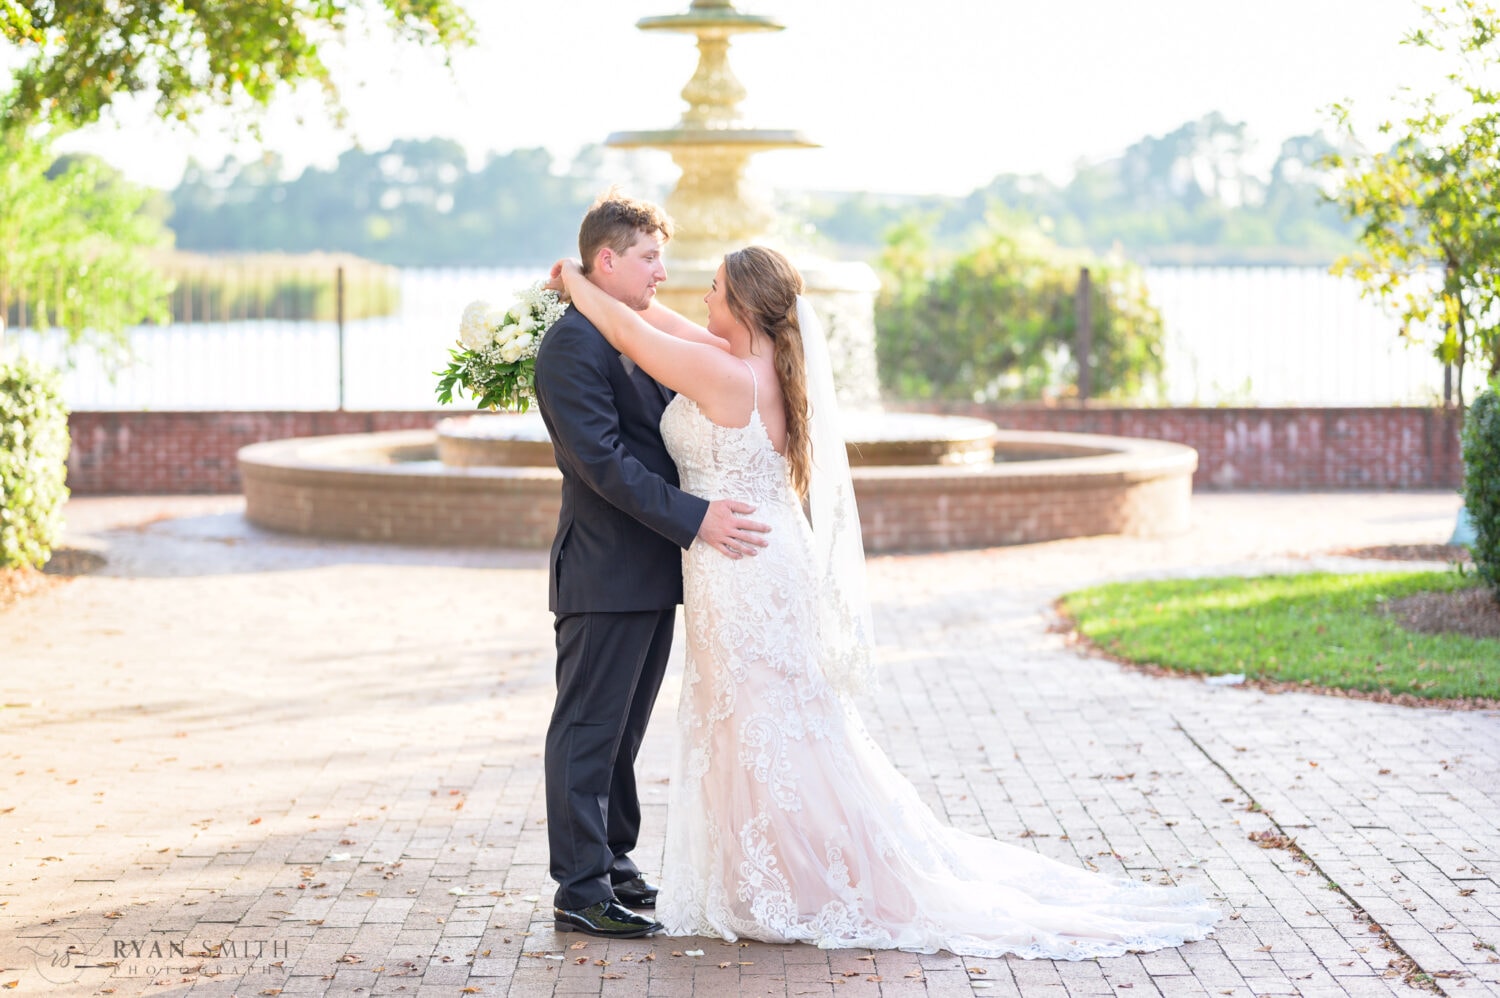 Bride and groom with the Harborwalk fountain in the background - Kaminski House Museum